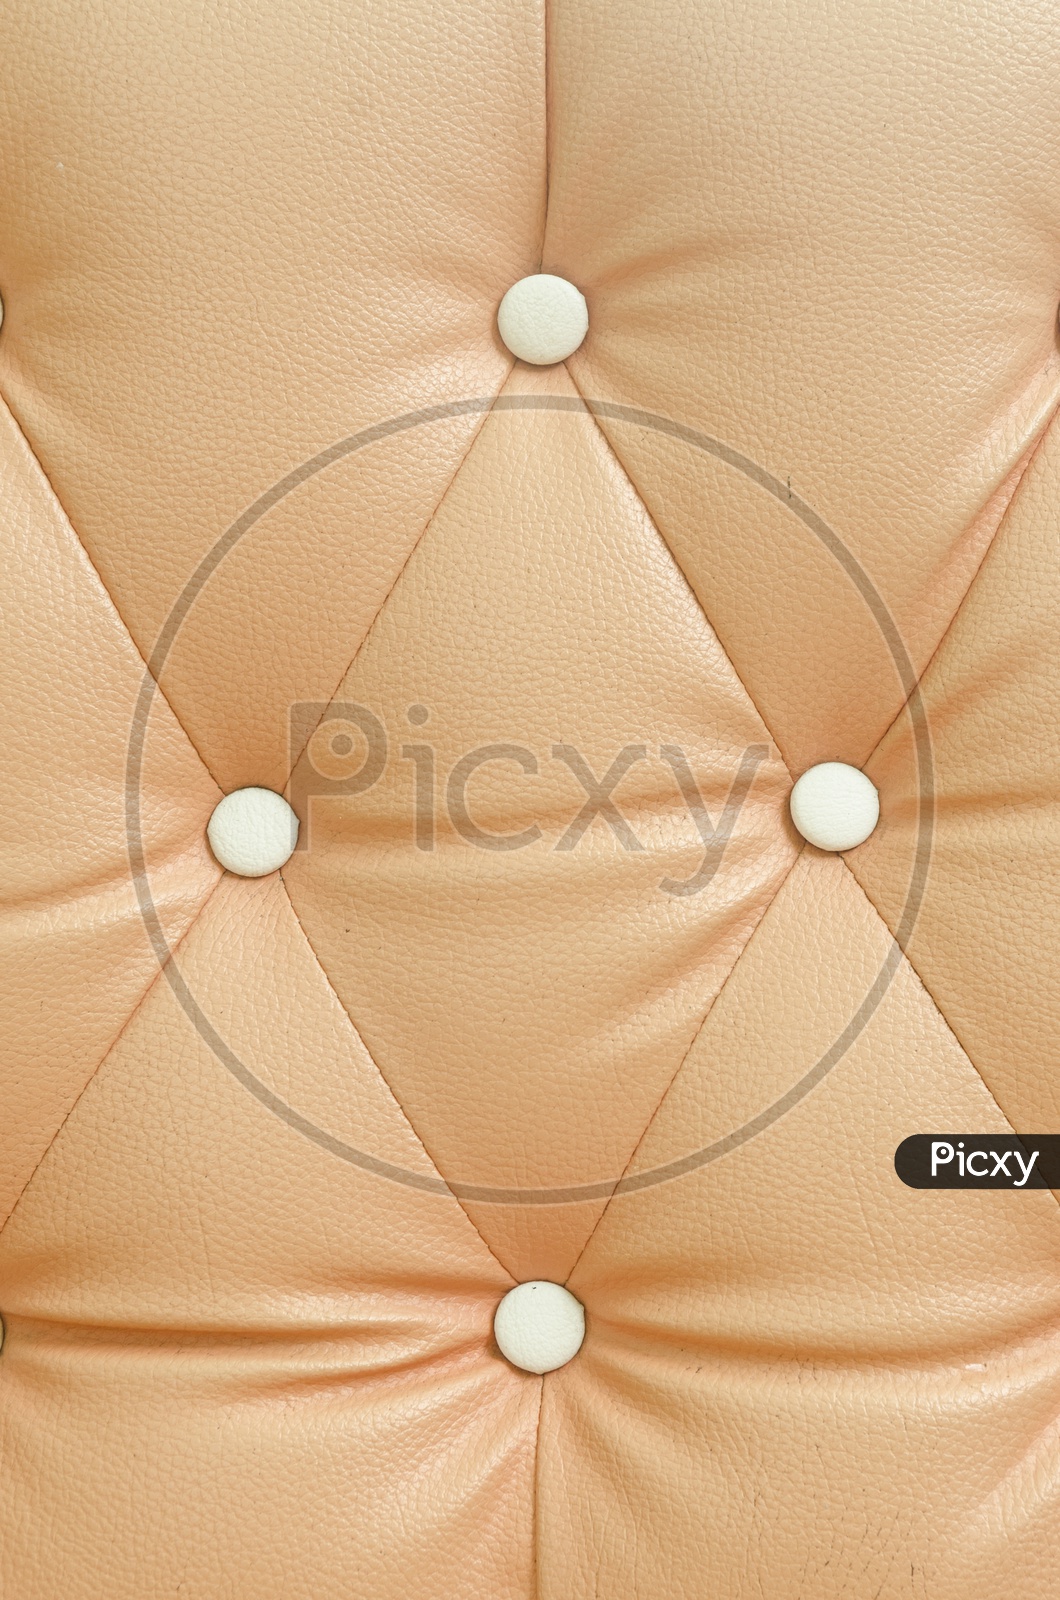 Luxury leather texture Forming a background